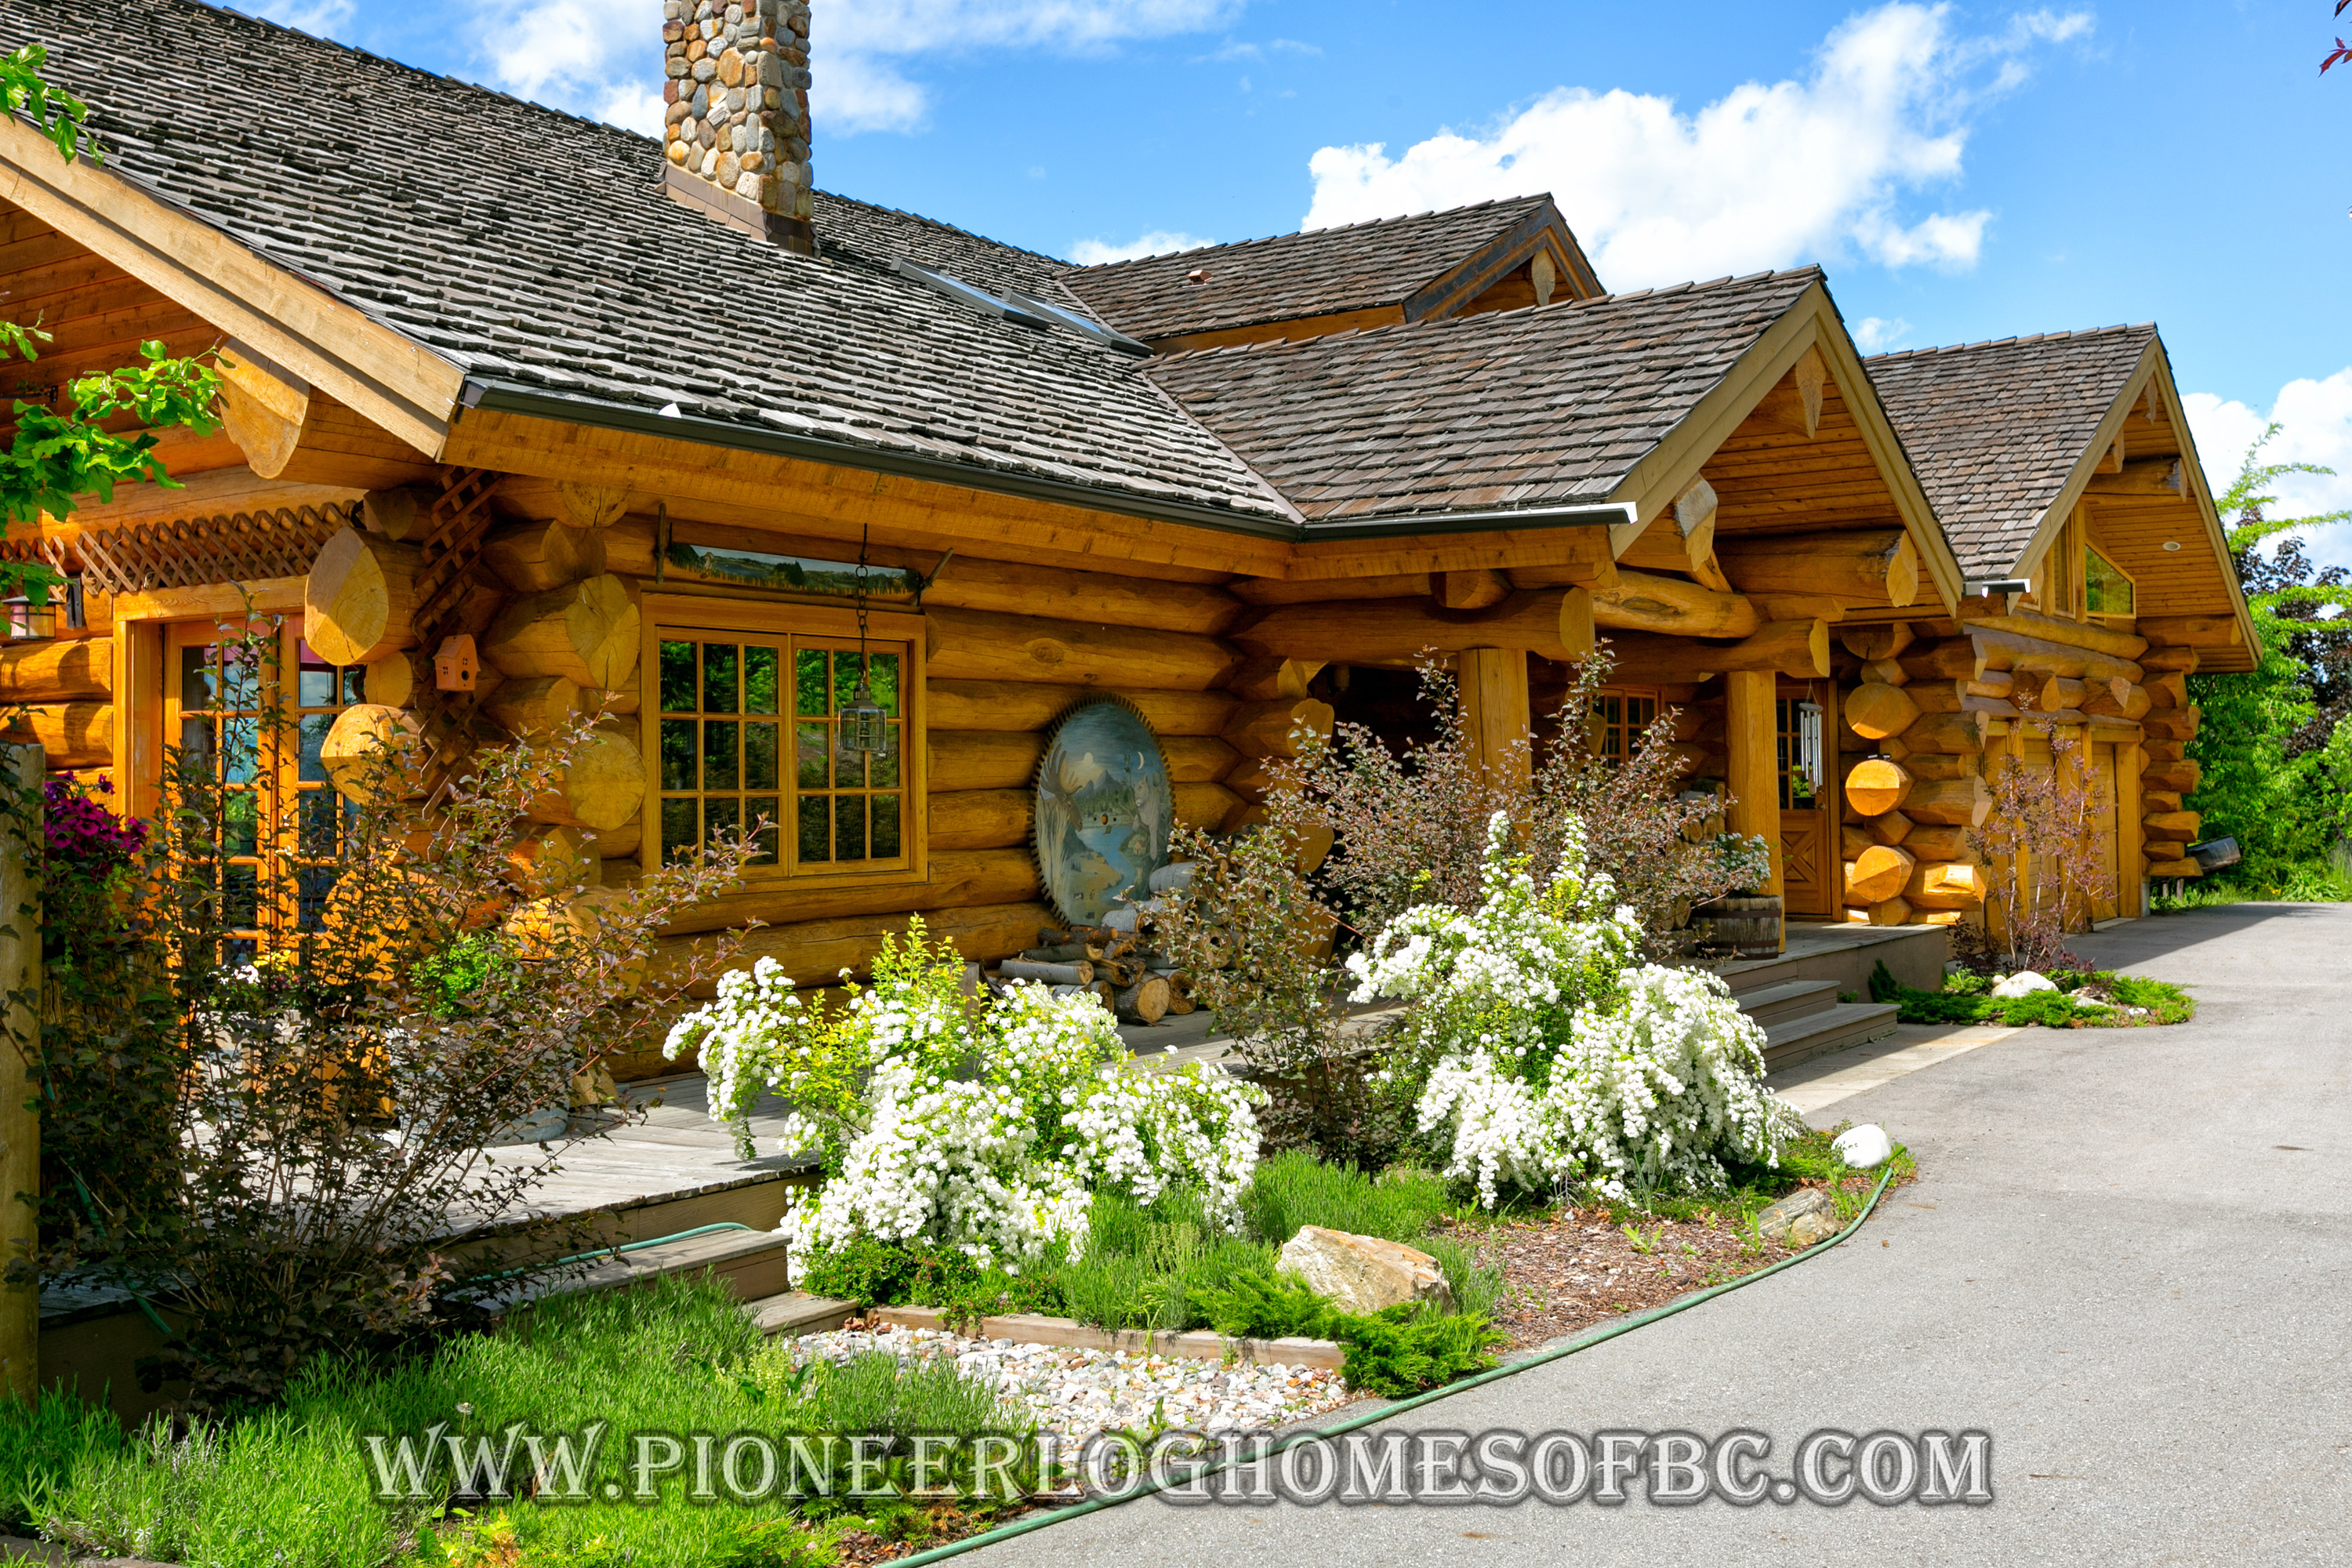 Different Log Homes Style 60 Breathtaking Log Homes The Art Of Images